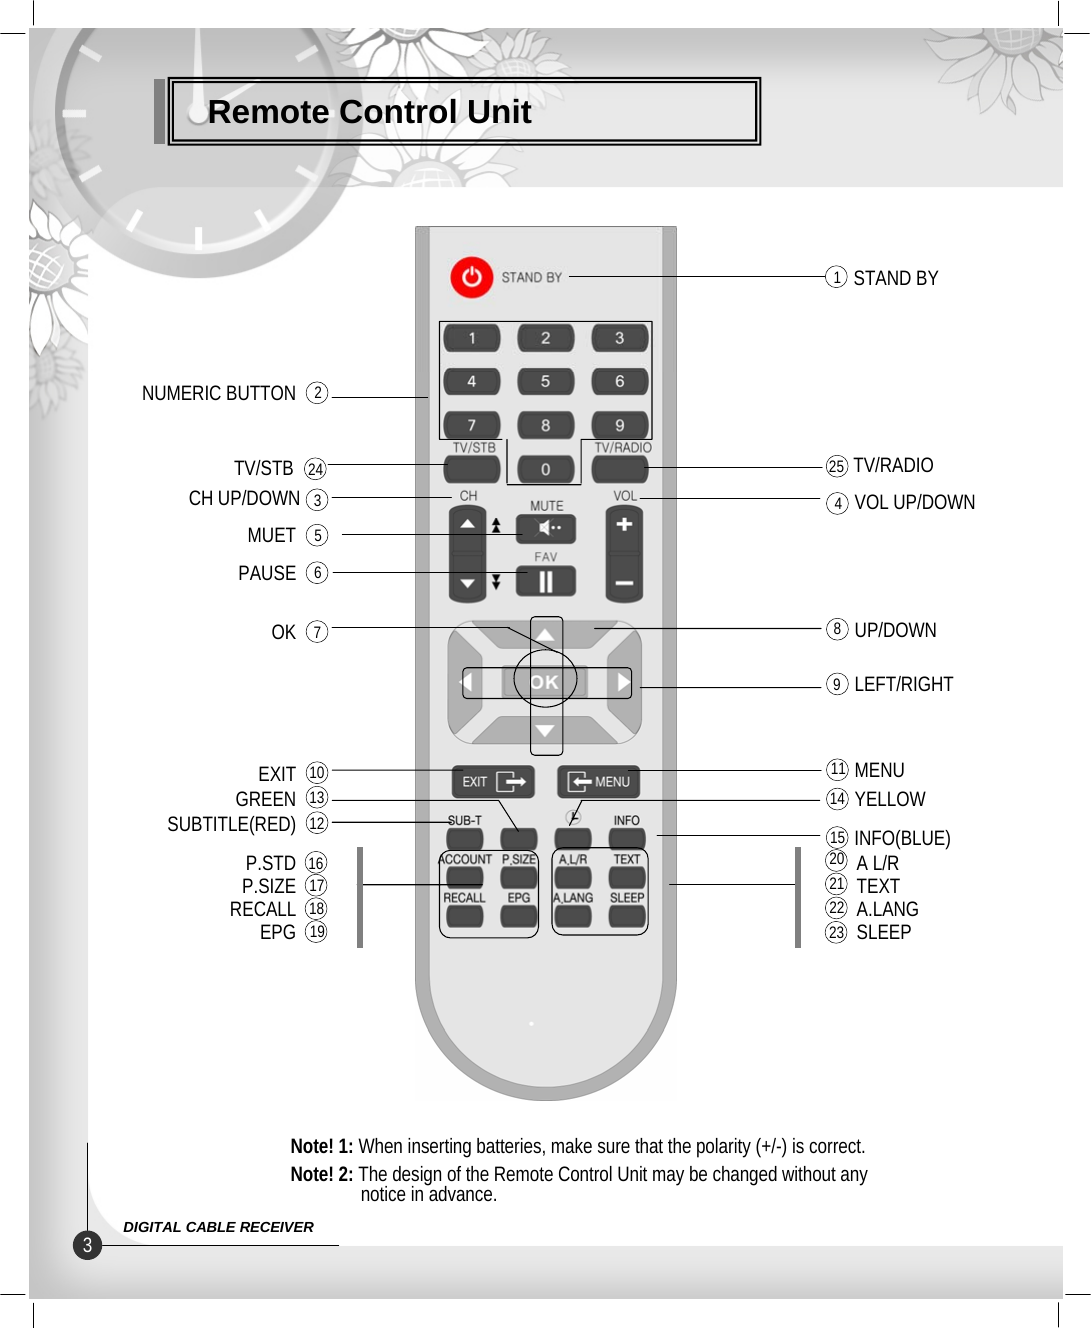 Remote Control Unit3DIGITAL CABLE RECEIVERNote! 1: When inserting batteries, make sure that the polarity (+/-) is correct.Note! 2: The design of the Remote Control Unit may be changed without anynotice in advance.MUET 5PAUSE 6OK 7EXIT 10GREEN 13SUBTITLE(RED) 12CH UP/DOWN 3NUMERIC BUTTON 2STAND BY1VOL UP/DOWN4LEFT/RIGHT9UP/DOWN8INFO(BLUE)15YELLOW14MENU11P.STDP.SIZERECALLEPGA L/RTEXTA.LANGSLEEP1617181921232022TV/STB   24 25 TV/RADIO